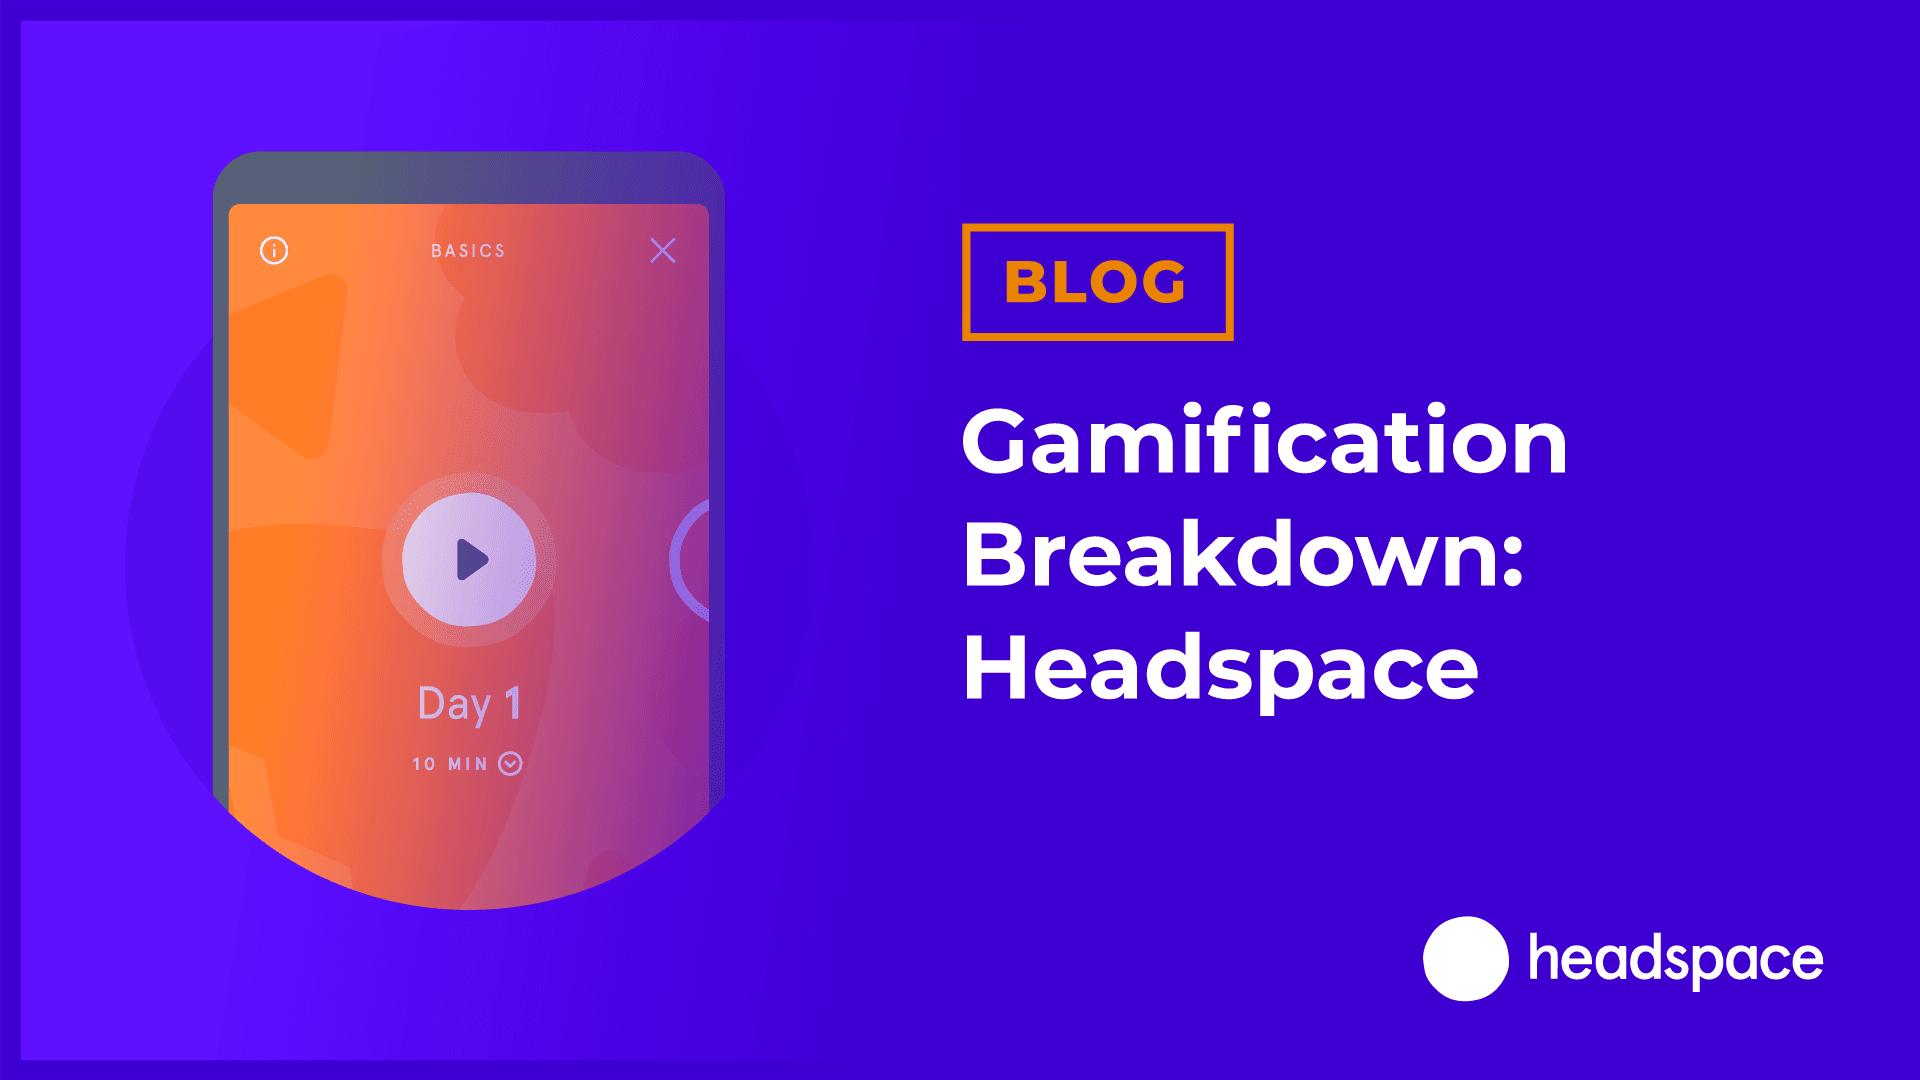 4 gamification features that make Headspace worth it (according to 2 million users)